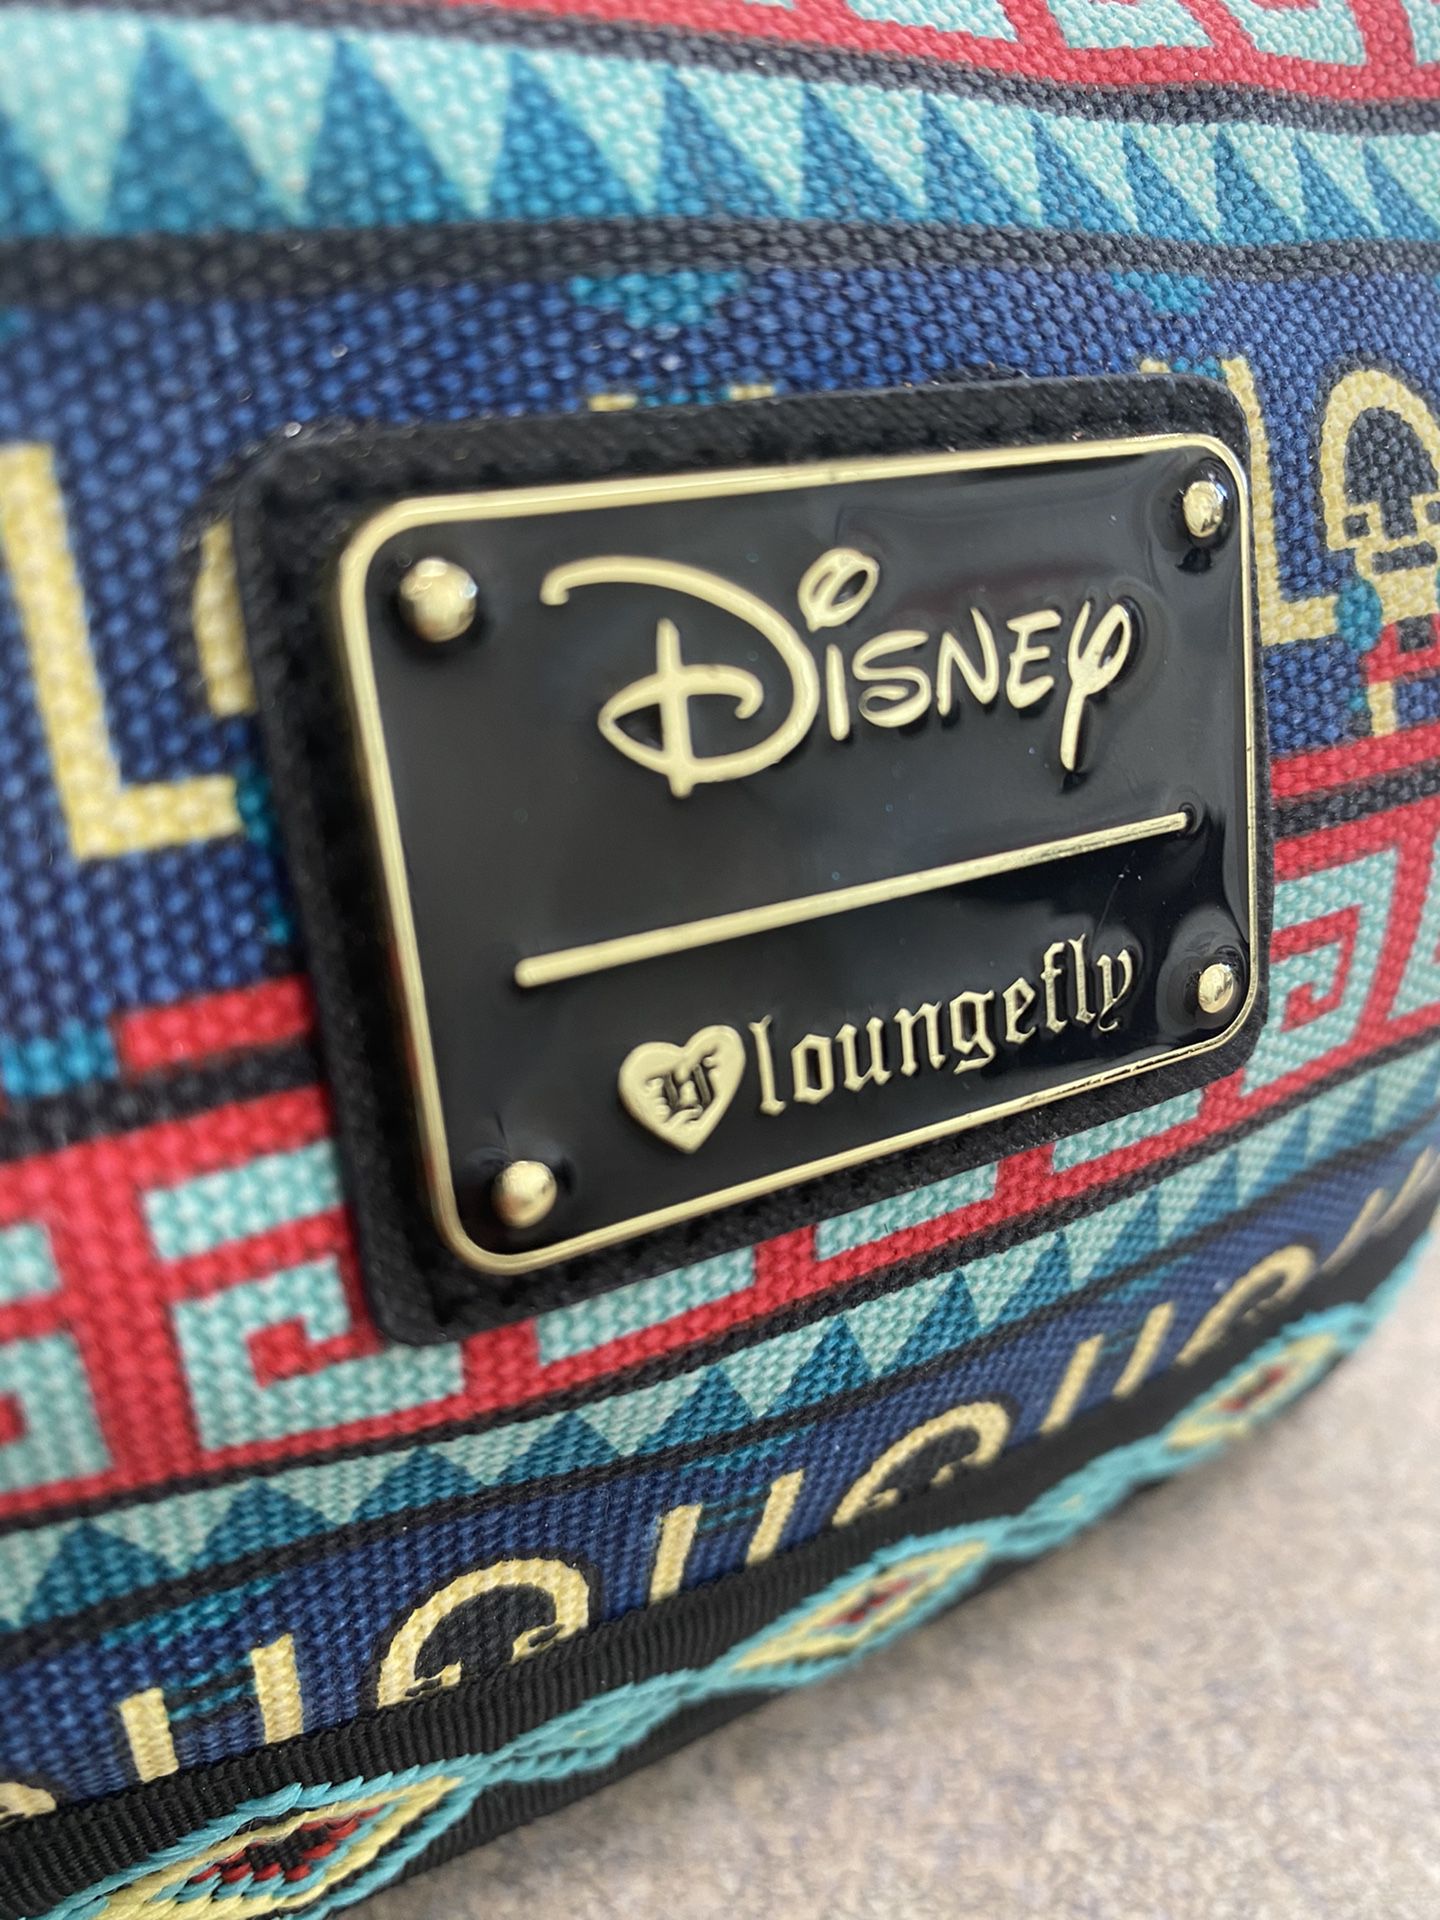 Disney Loungefly *The Emperors New Groove* Bag